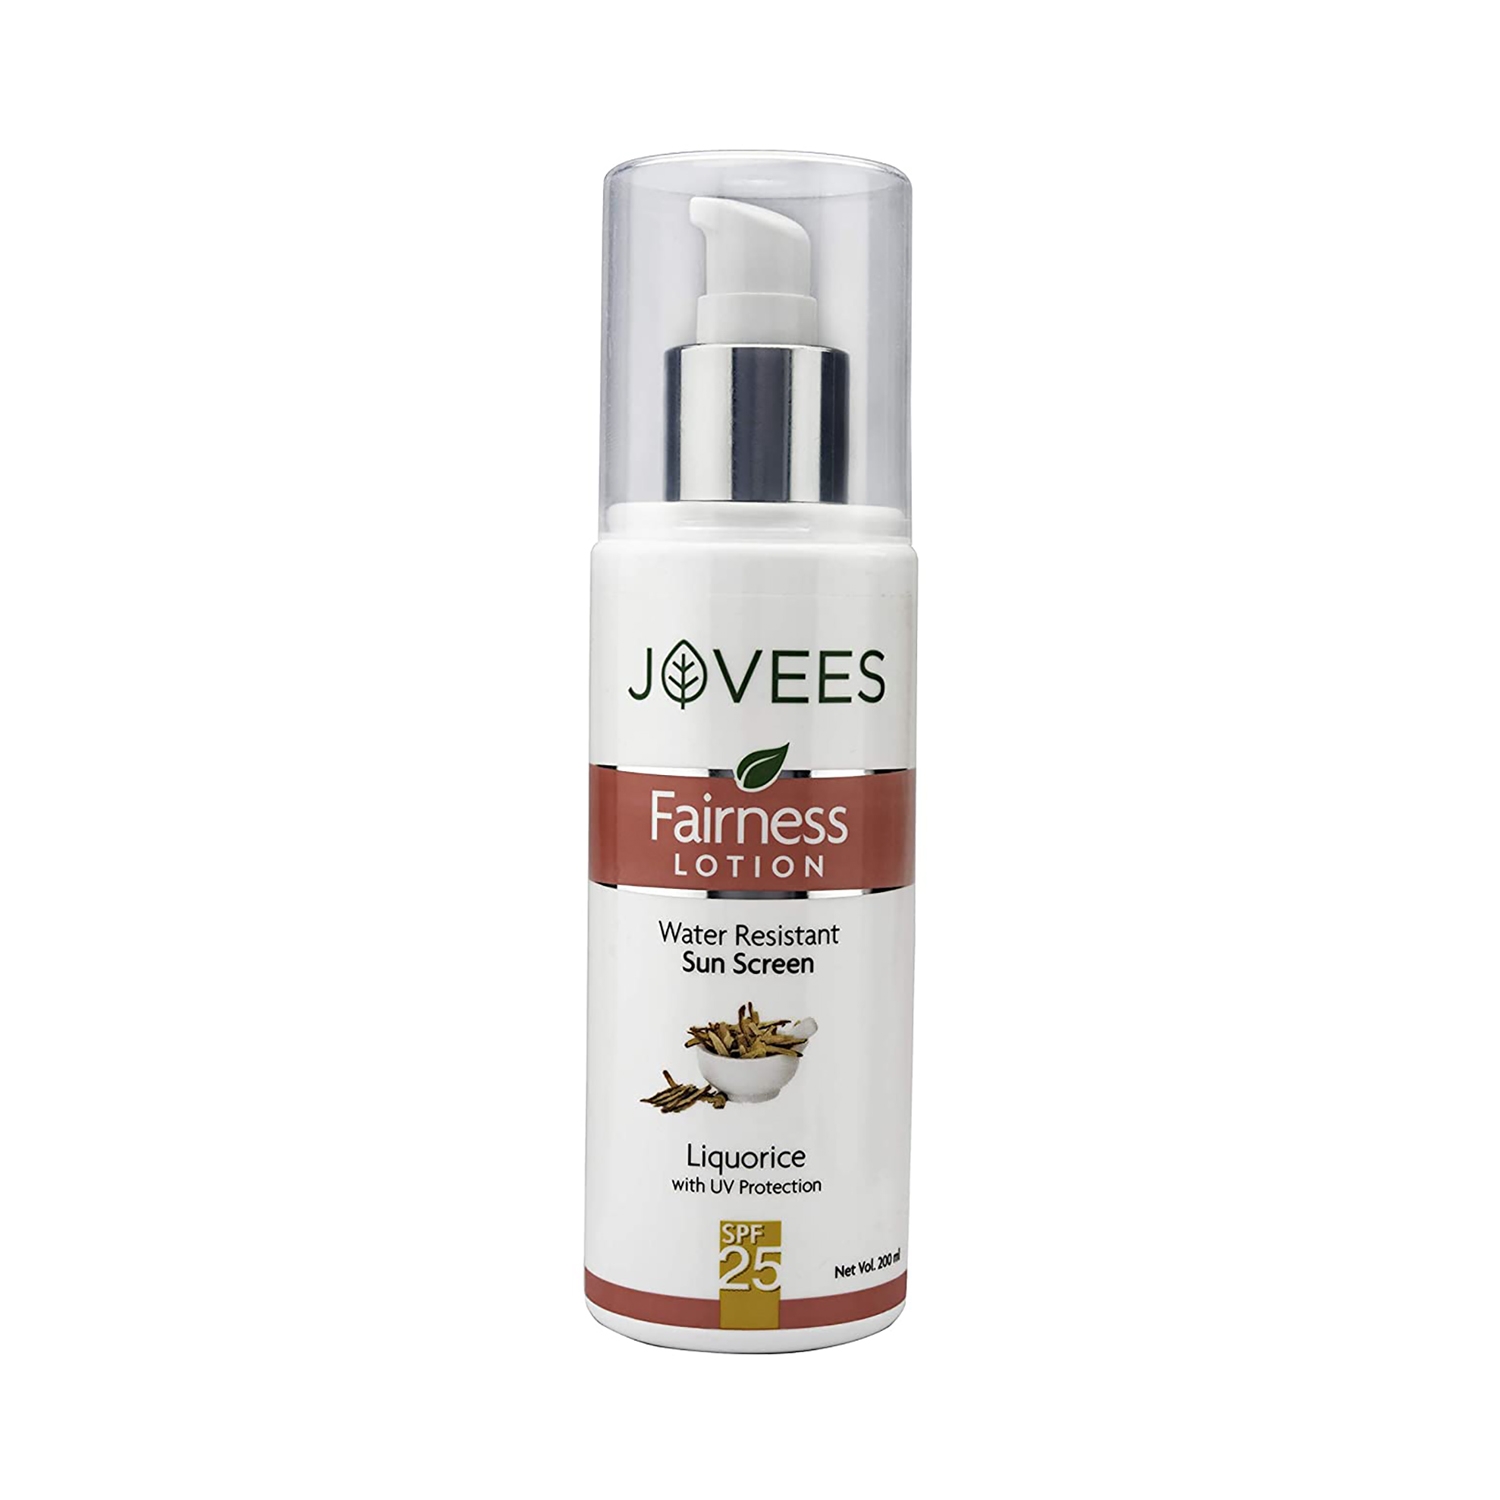 Jovees Liquorice with UV Protection Fairness Lotion SPF 25 (200ml)